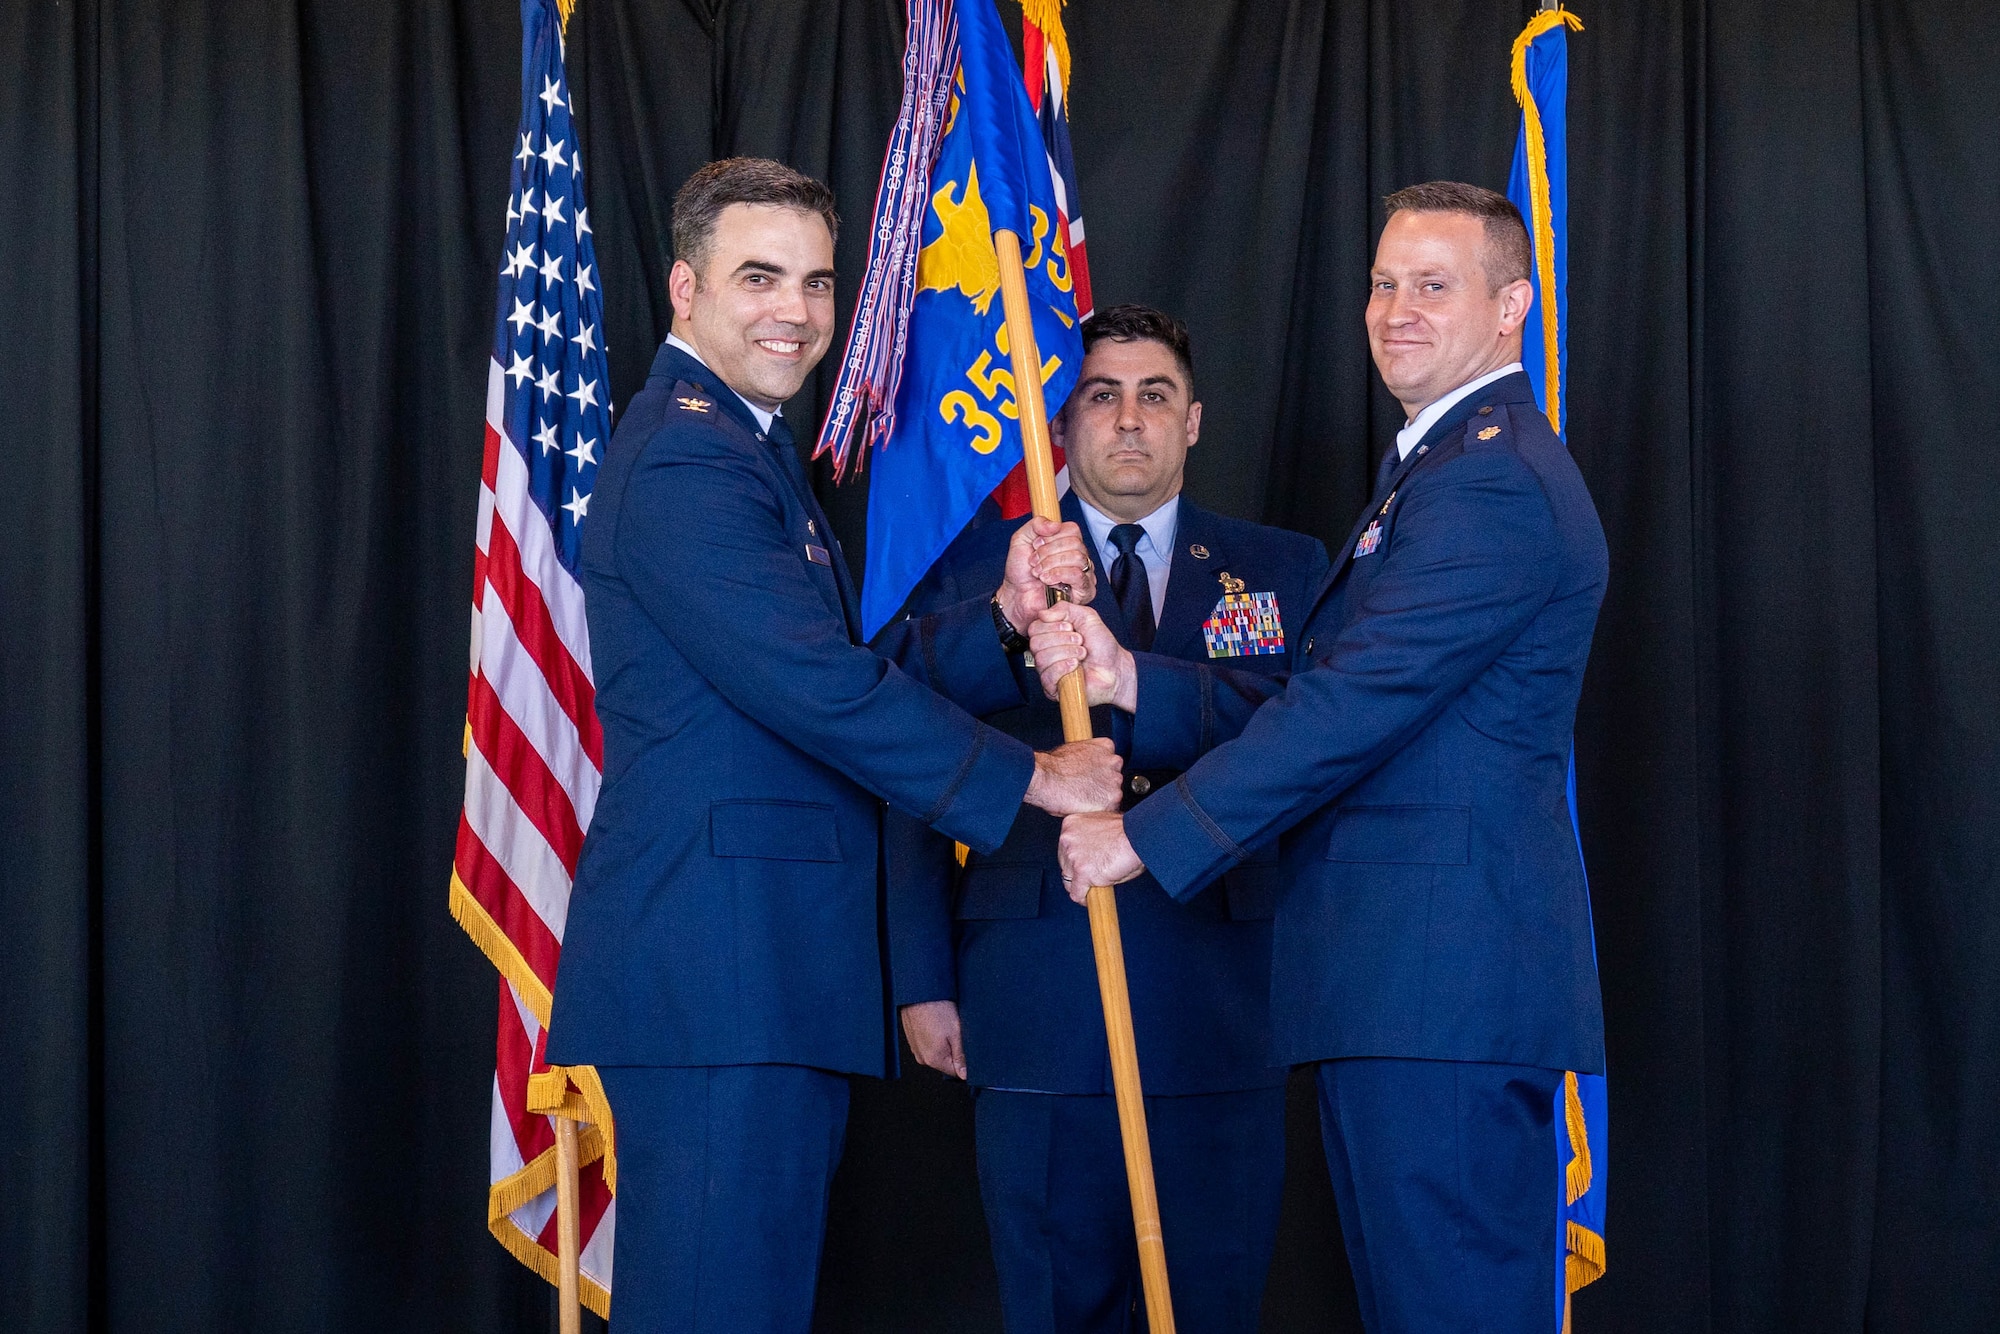 Lt. Col. Domenic Magazu III, ​​ assumes command of the 352d Cyberspace Operational Squadron by accepting the guidon from Col. John Picklesimer, 67th Cyberspace Operations Group commander during a Change of Command Ceremony at Joint Base Pearl Harbor-Hickam, Hawaii, June 1 2022. The 352d COS acts as the Air Forces Cyber execution arm for conducting global cyberspace operations, providing organic operations training, cyber capability development, operations testing, and range capabilities to drive readiness across the Cyber Mission Force. (U.S. Air Force photo by Airman 1st Class Makensie Cooper)